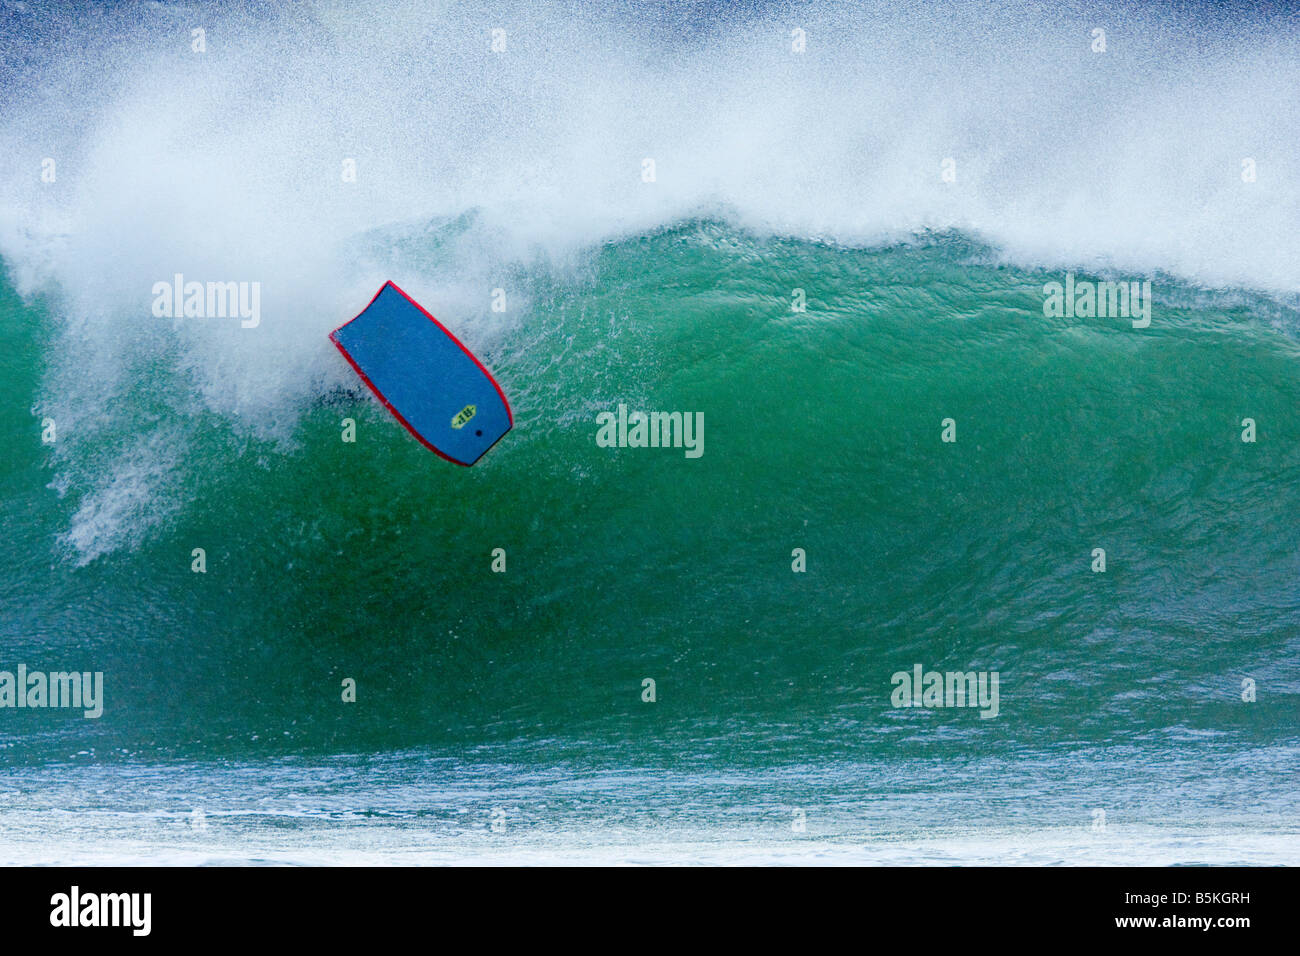 Wipeout, surfboard emerging from wave, Cornwall, UK, with space around subject for copy or graphic. Stock Photo